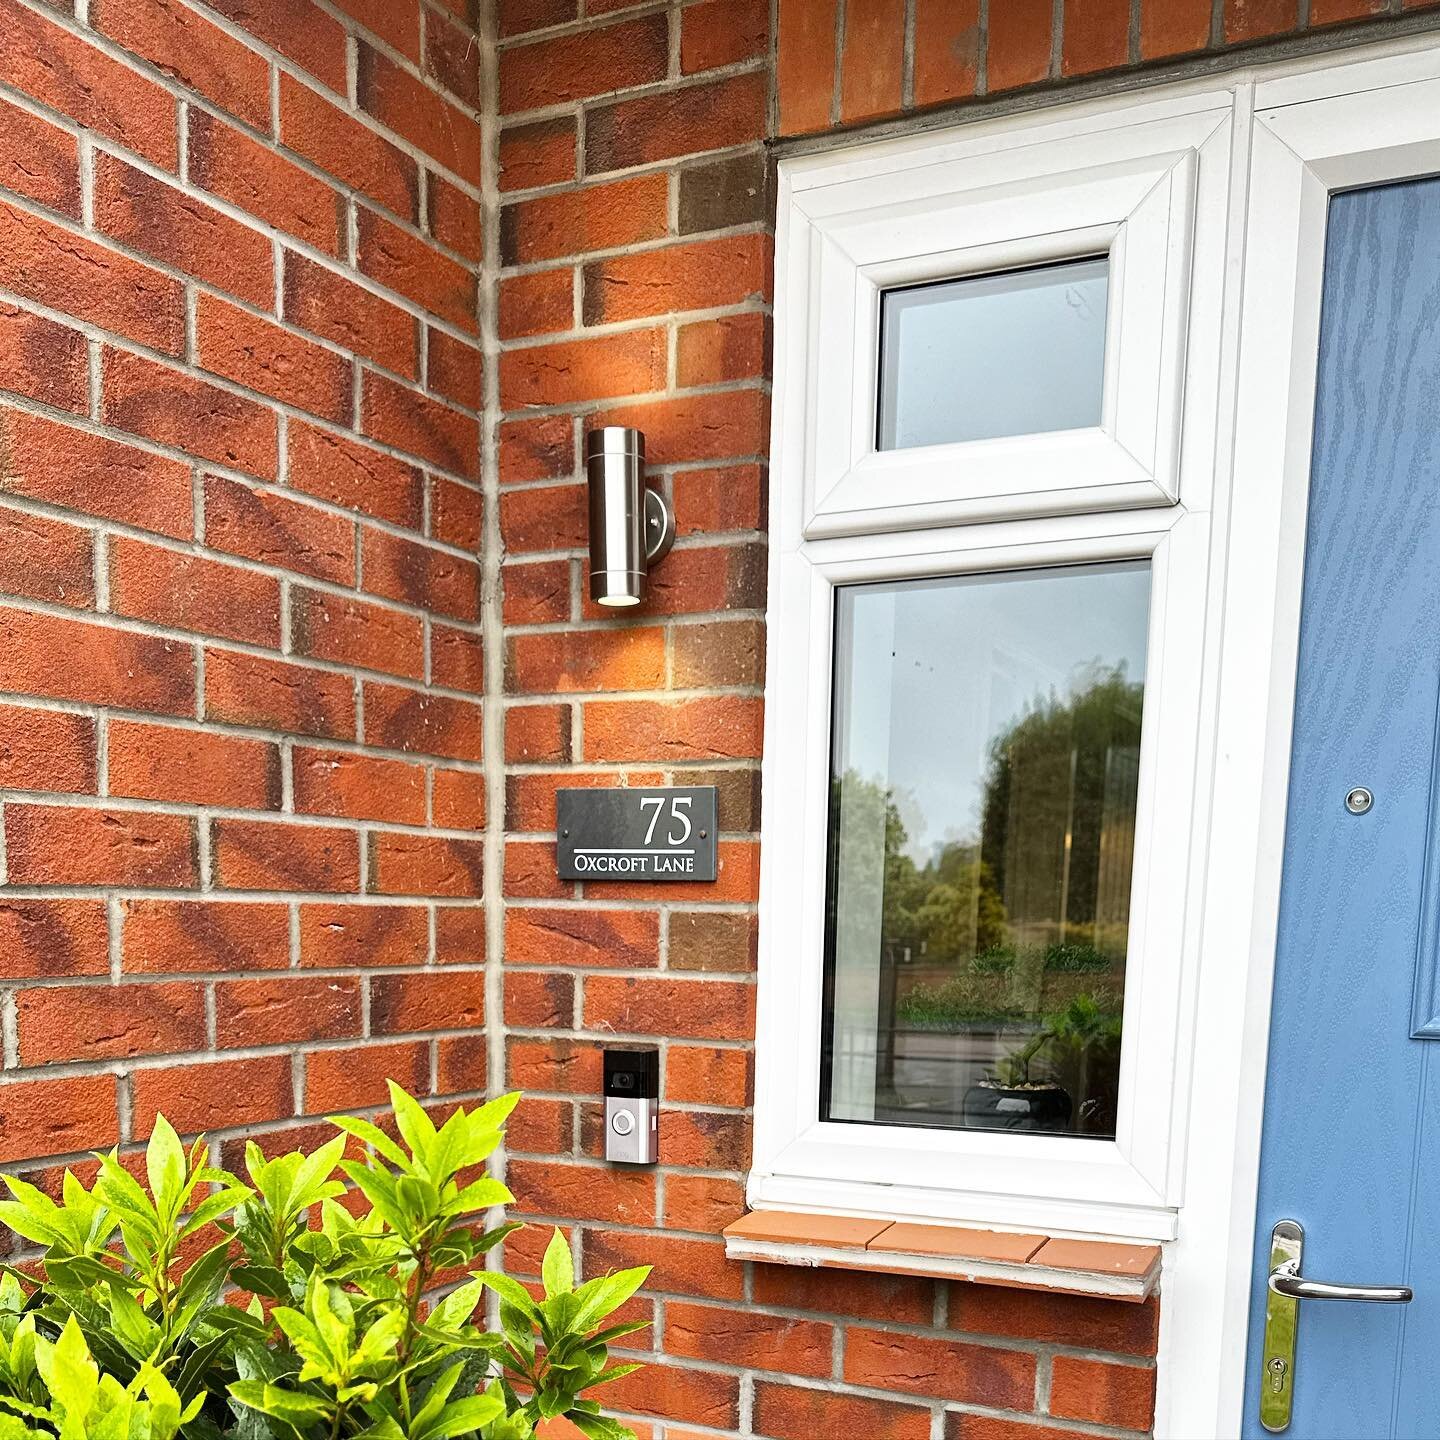 Did you know.. all of our homes come with a ring doorbell? For extra peace of mind, or to never miss a delivery again, ring has you covered 🦌 

#stancliffehomes #sherwoodfields #oxcroftlane #bolsoverdevelopment #newbuildbolsover #newbuildtansley #ne